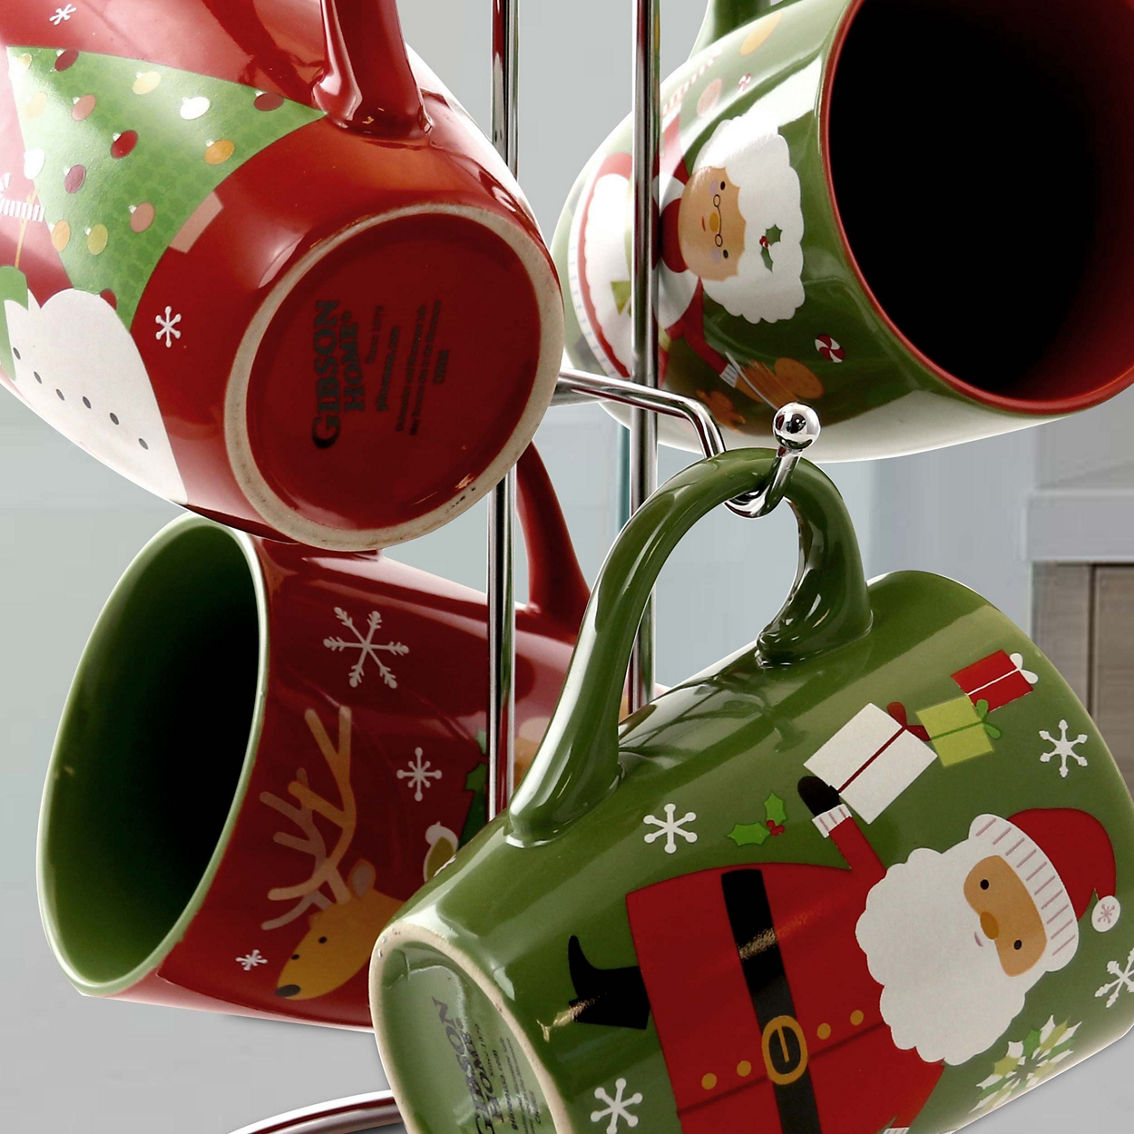 Gibson Home Santa Smile 4 Piece 15 Ounce Stoneware Mugs in Assorted Designs - Image 4 of 5